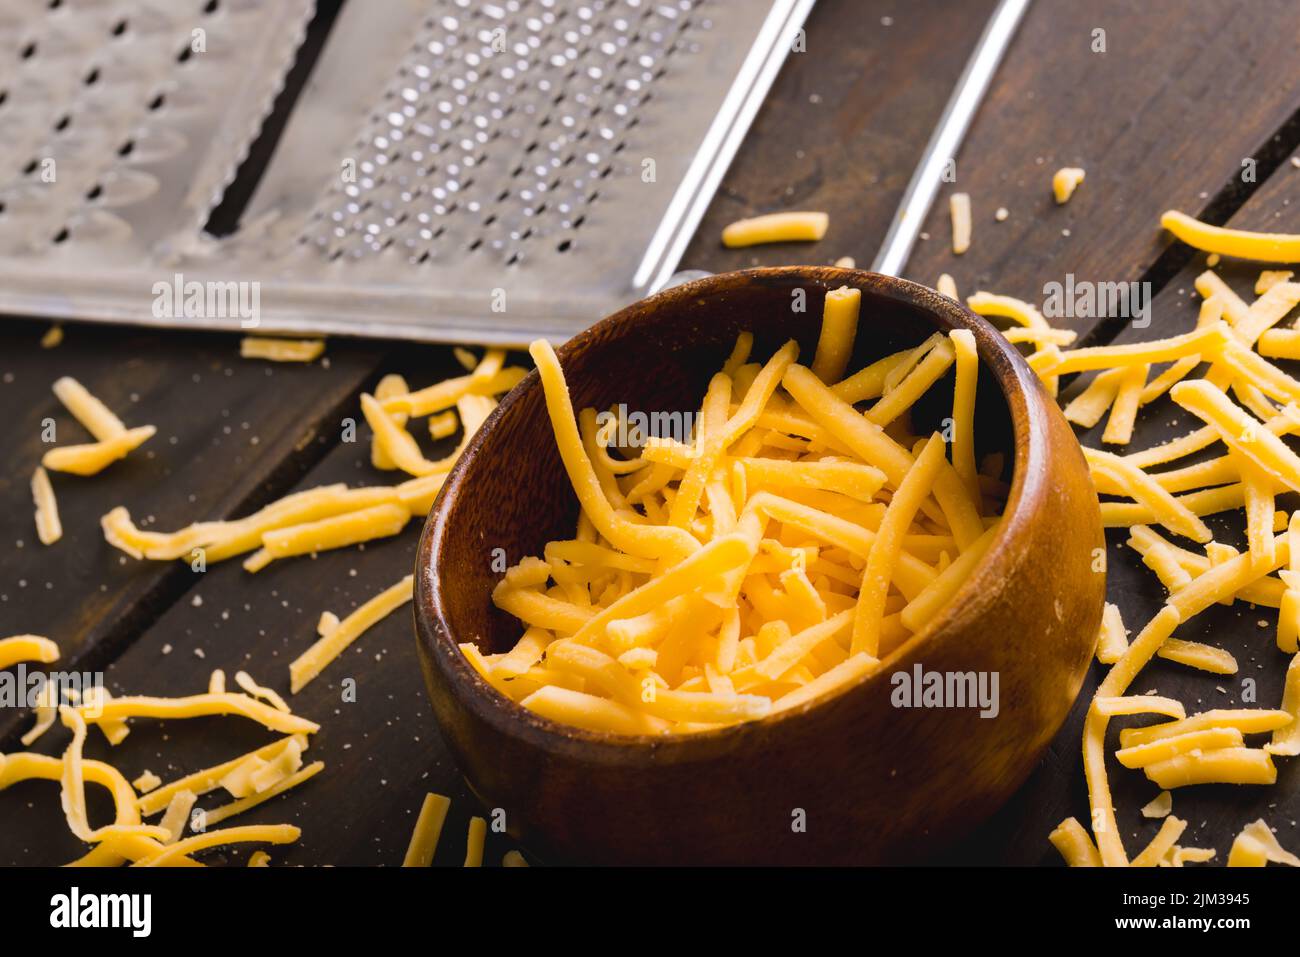 https://c8.alamy.com/comp/2JM3945/close-up-of-grated-yellow-cheese-and-bowl-by-grater-on-table-copy-space-2JM3945.jpg